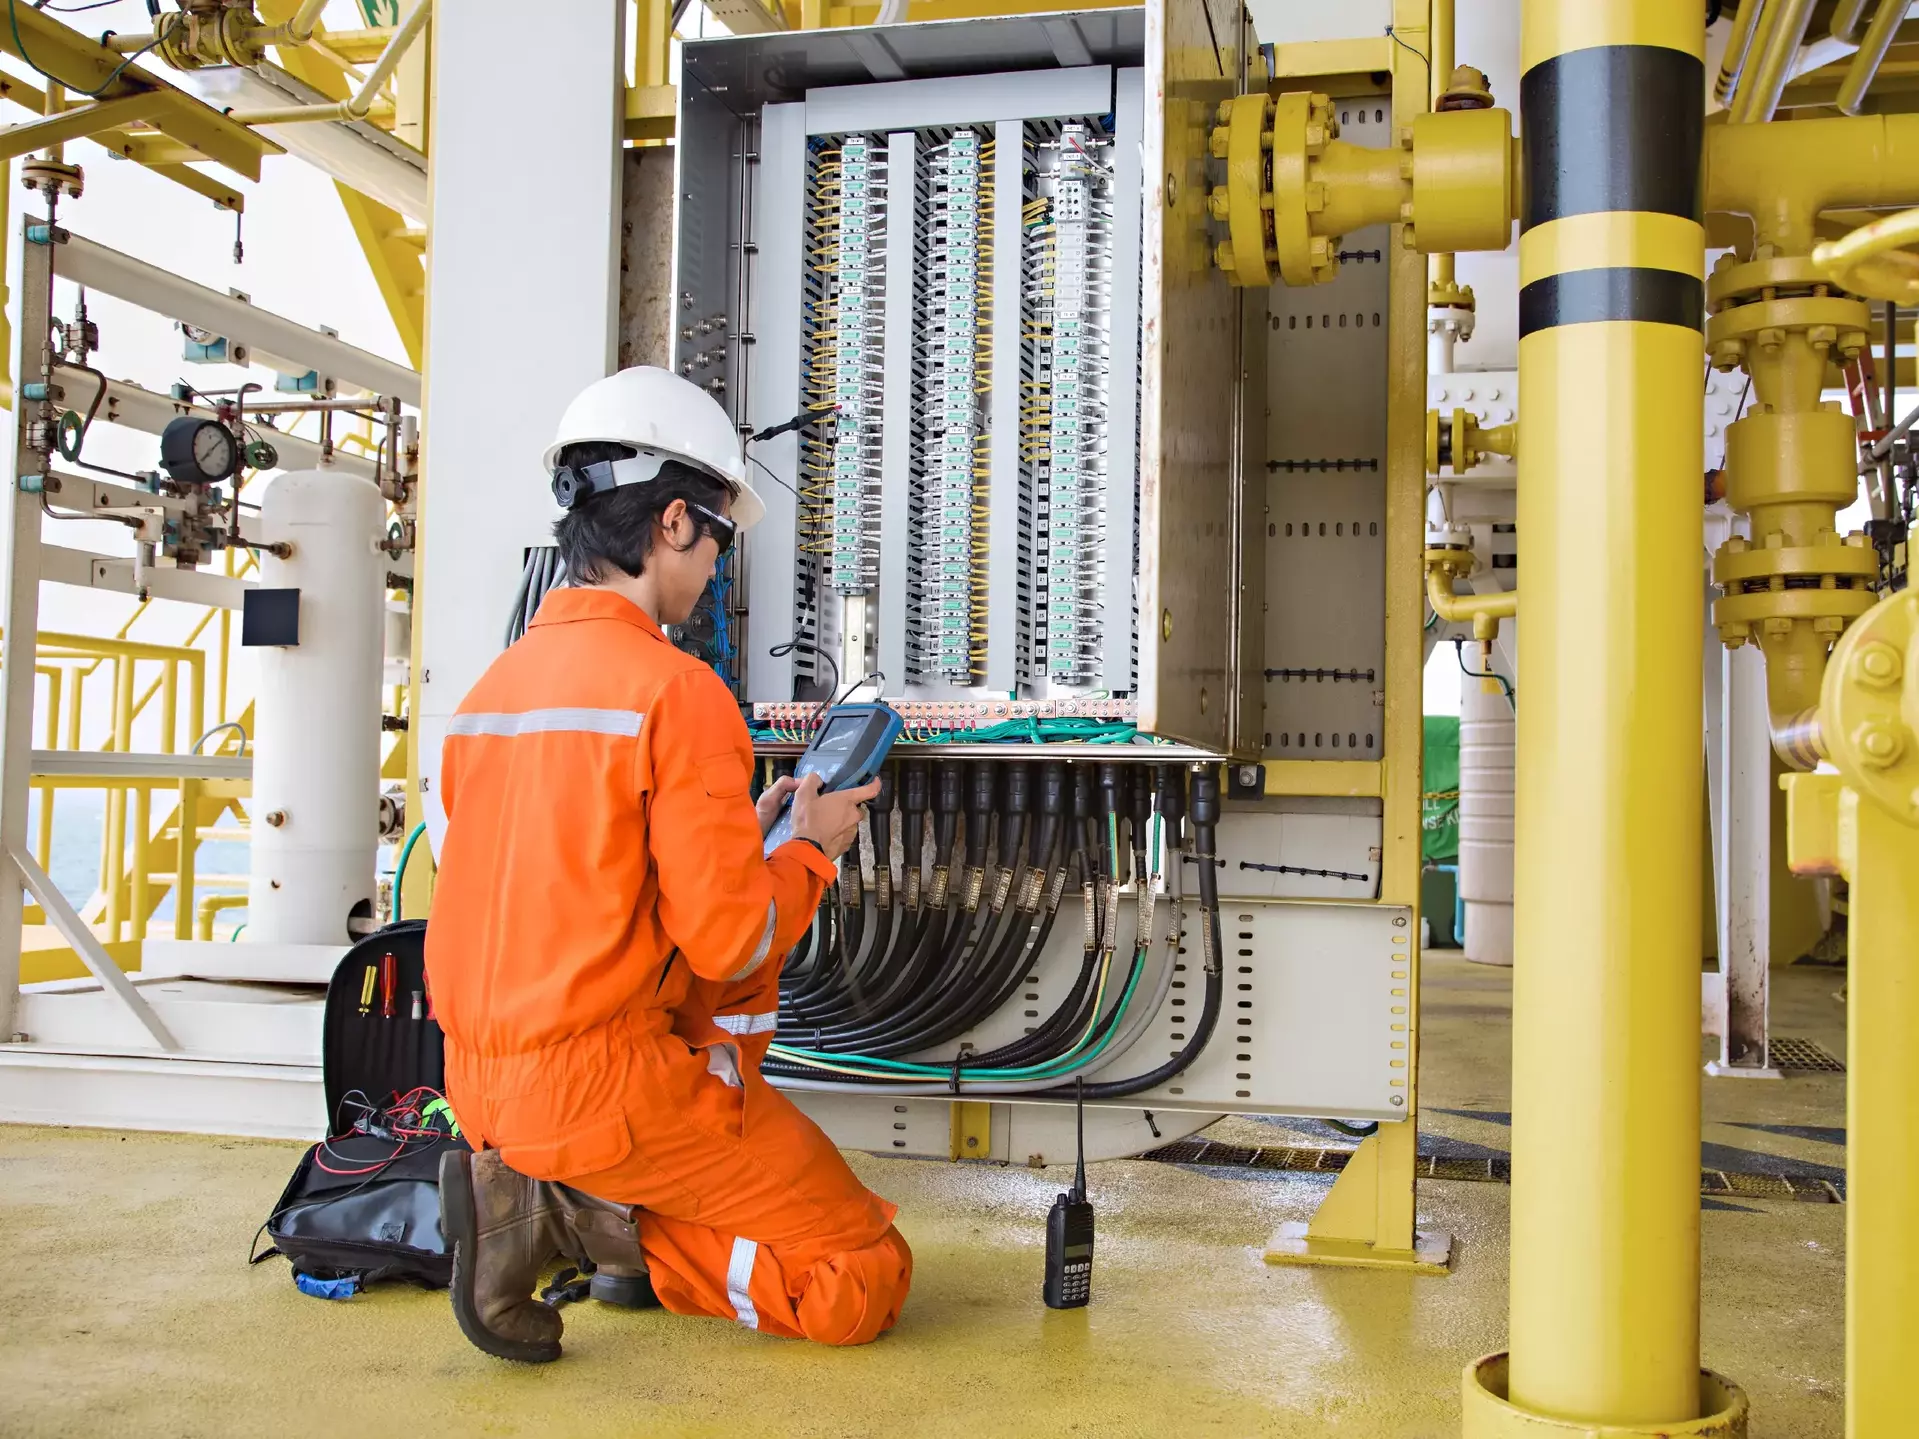 Electrical and instrument technician maintenance electric system at oil and gas processing platform